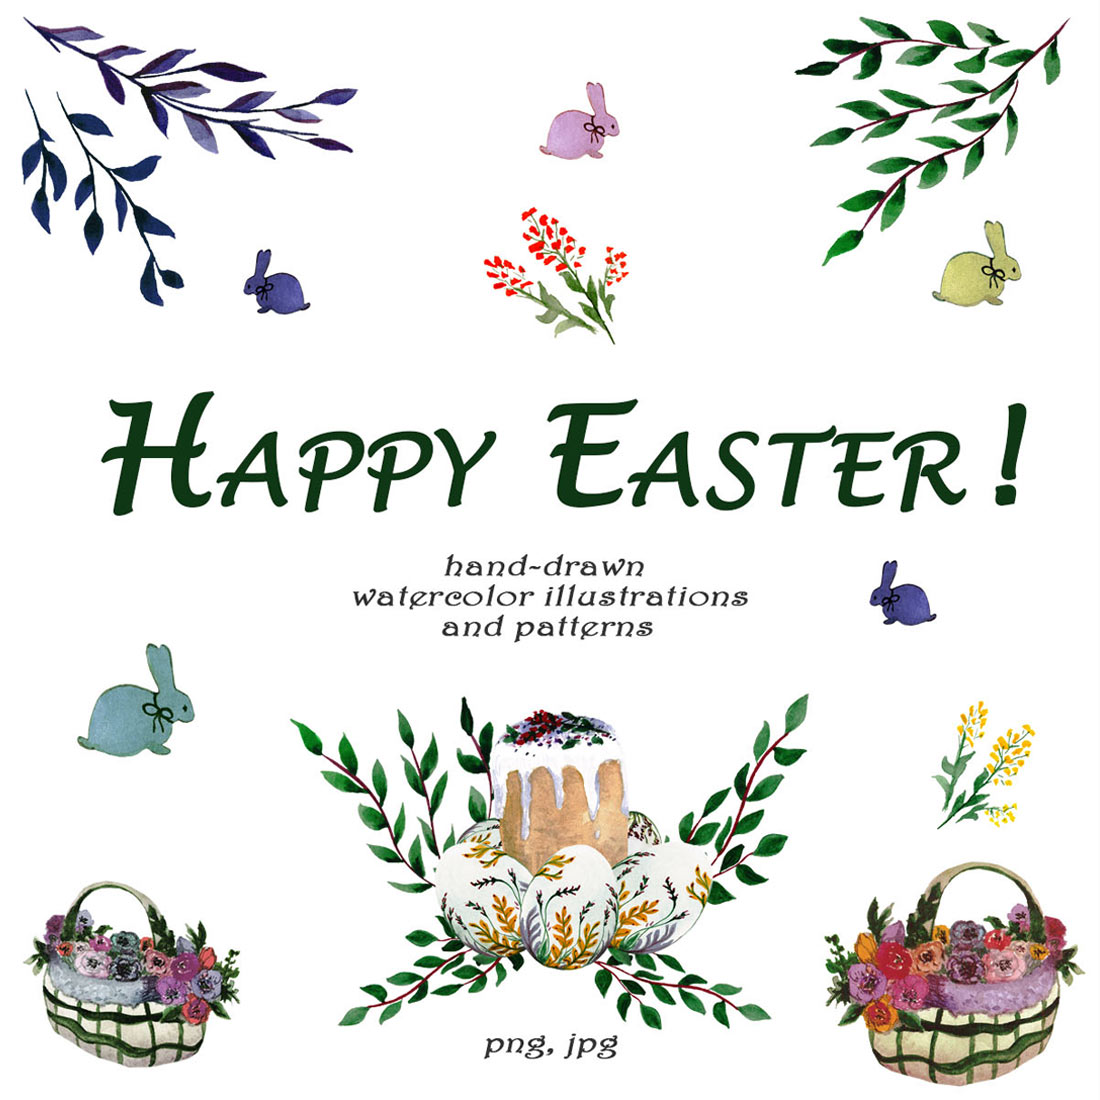 Watercolor Illustrations And Seamless Patterns With Spring Easter Mood Cover Image.